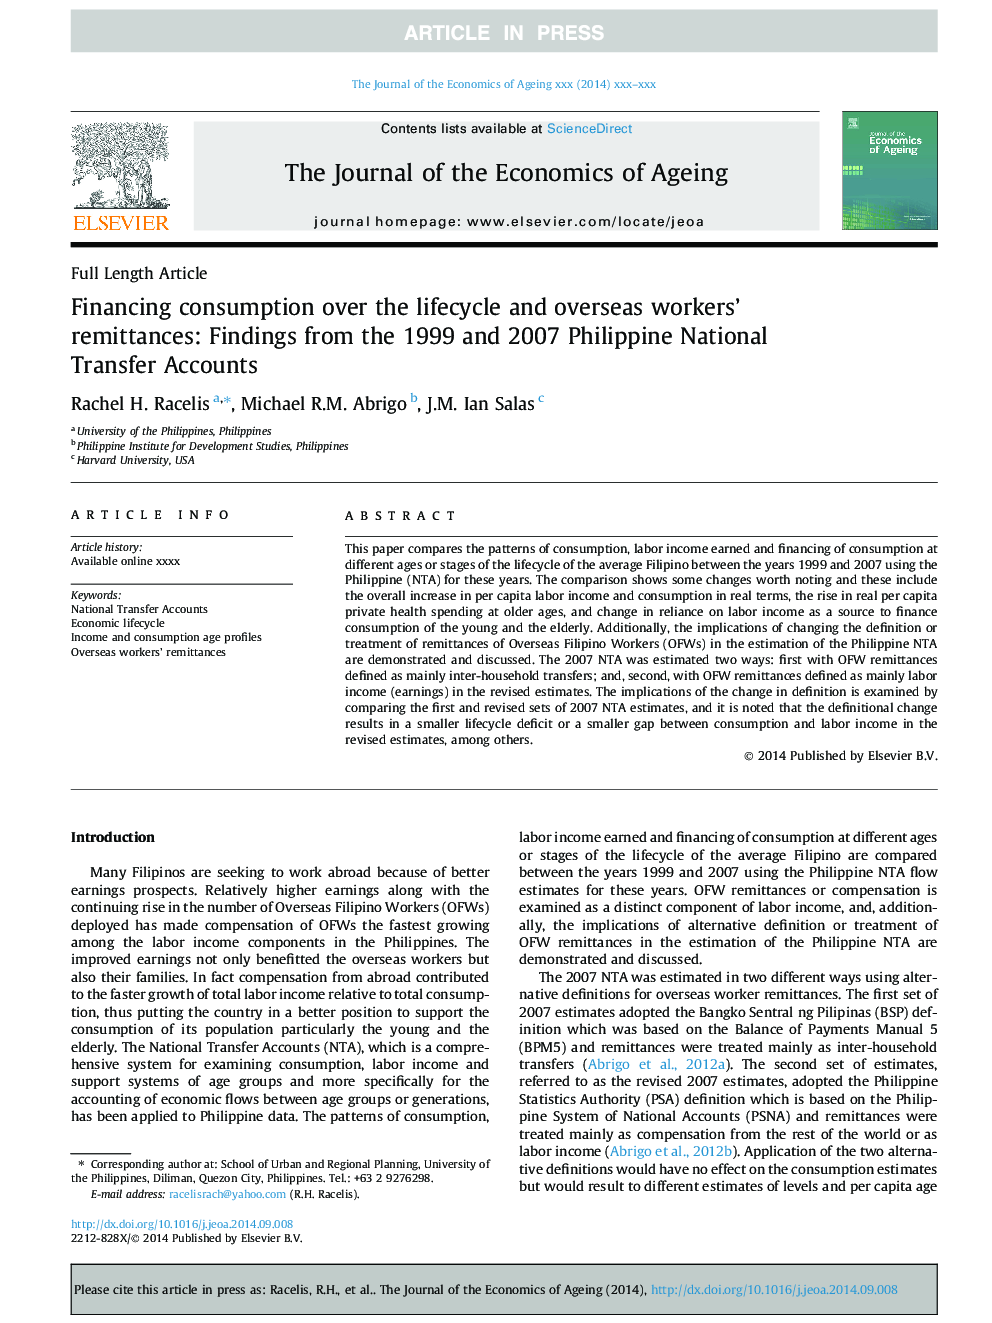 Financing consumption over the lifecycle and overseas workers' remittances: Findings from the 1999 and 2007 Philippine National Transfer Accounts